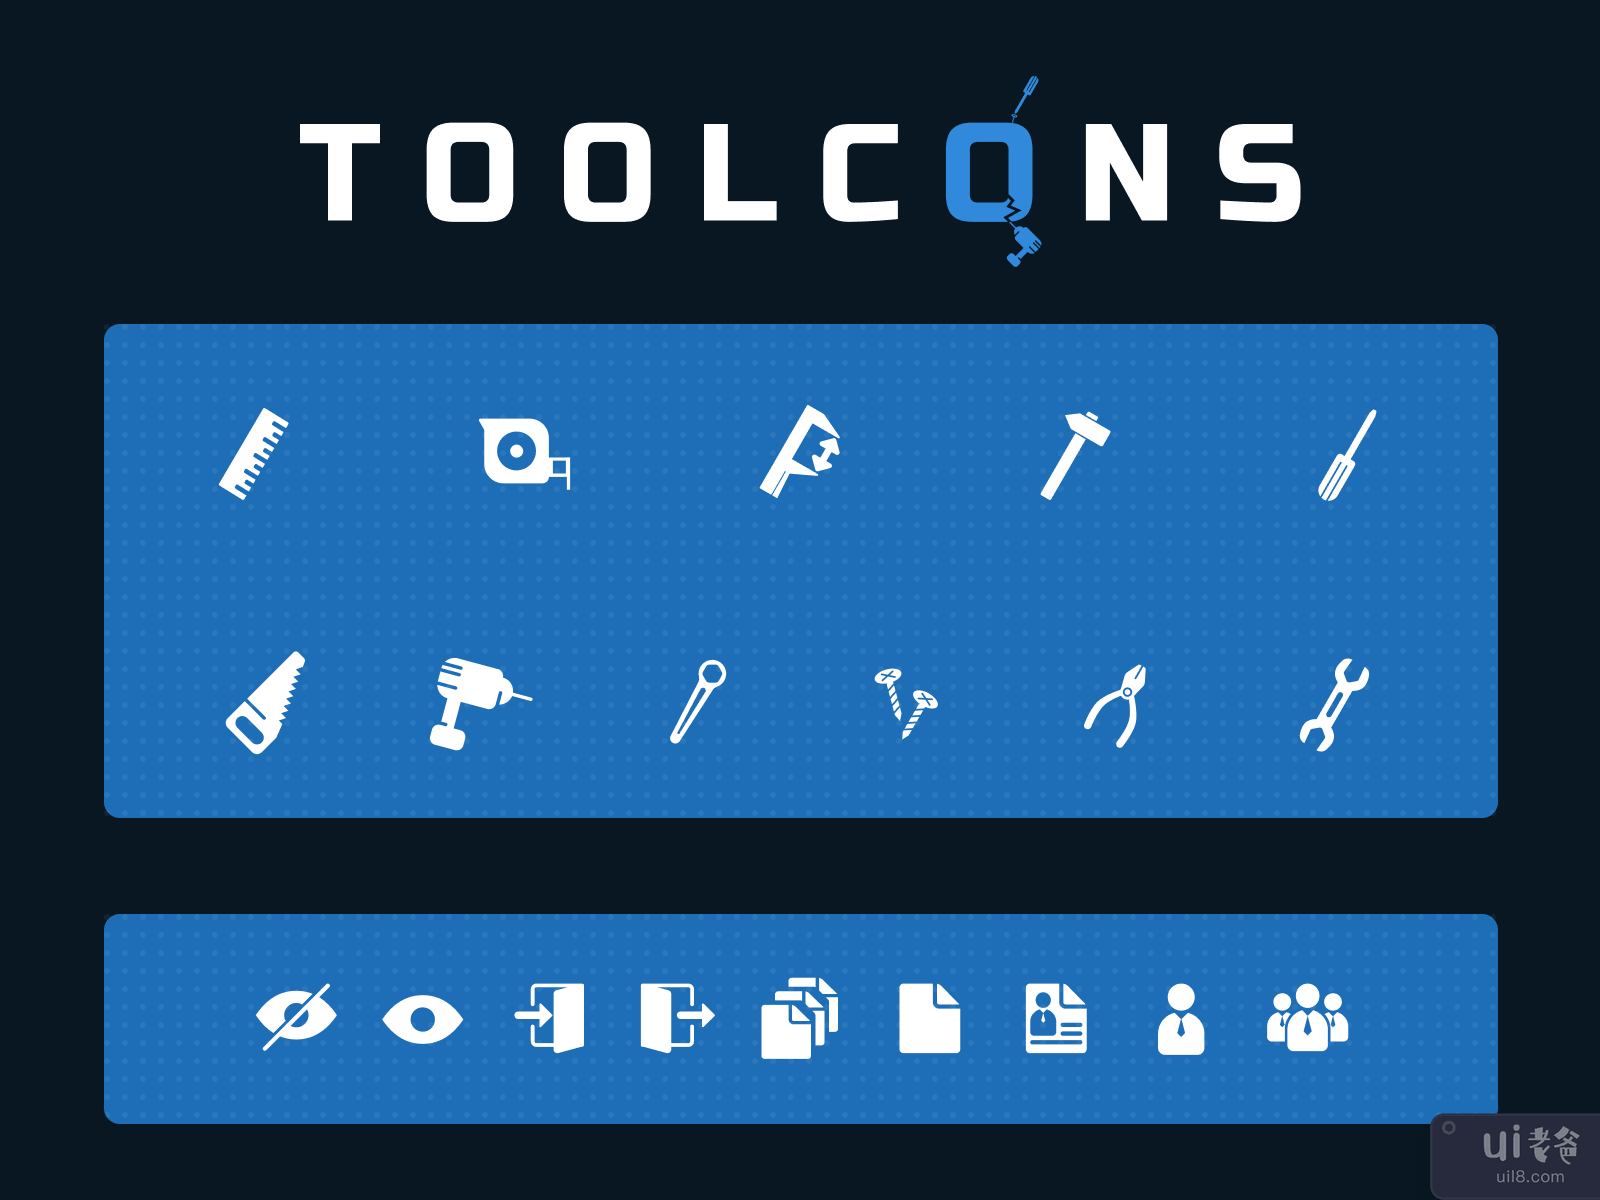 Toolcons - tools in glyphs